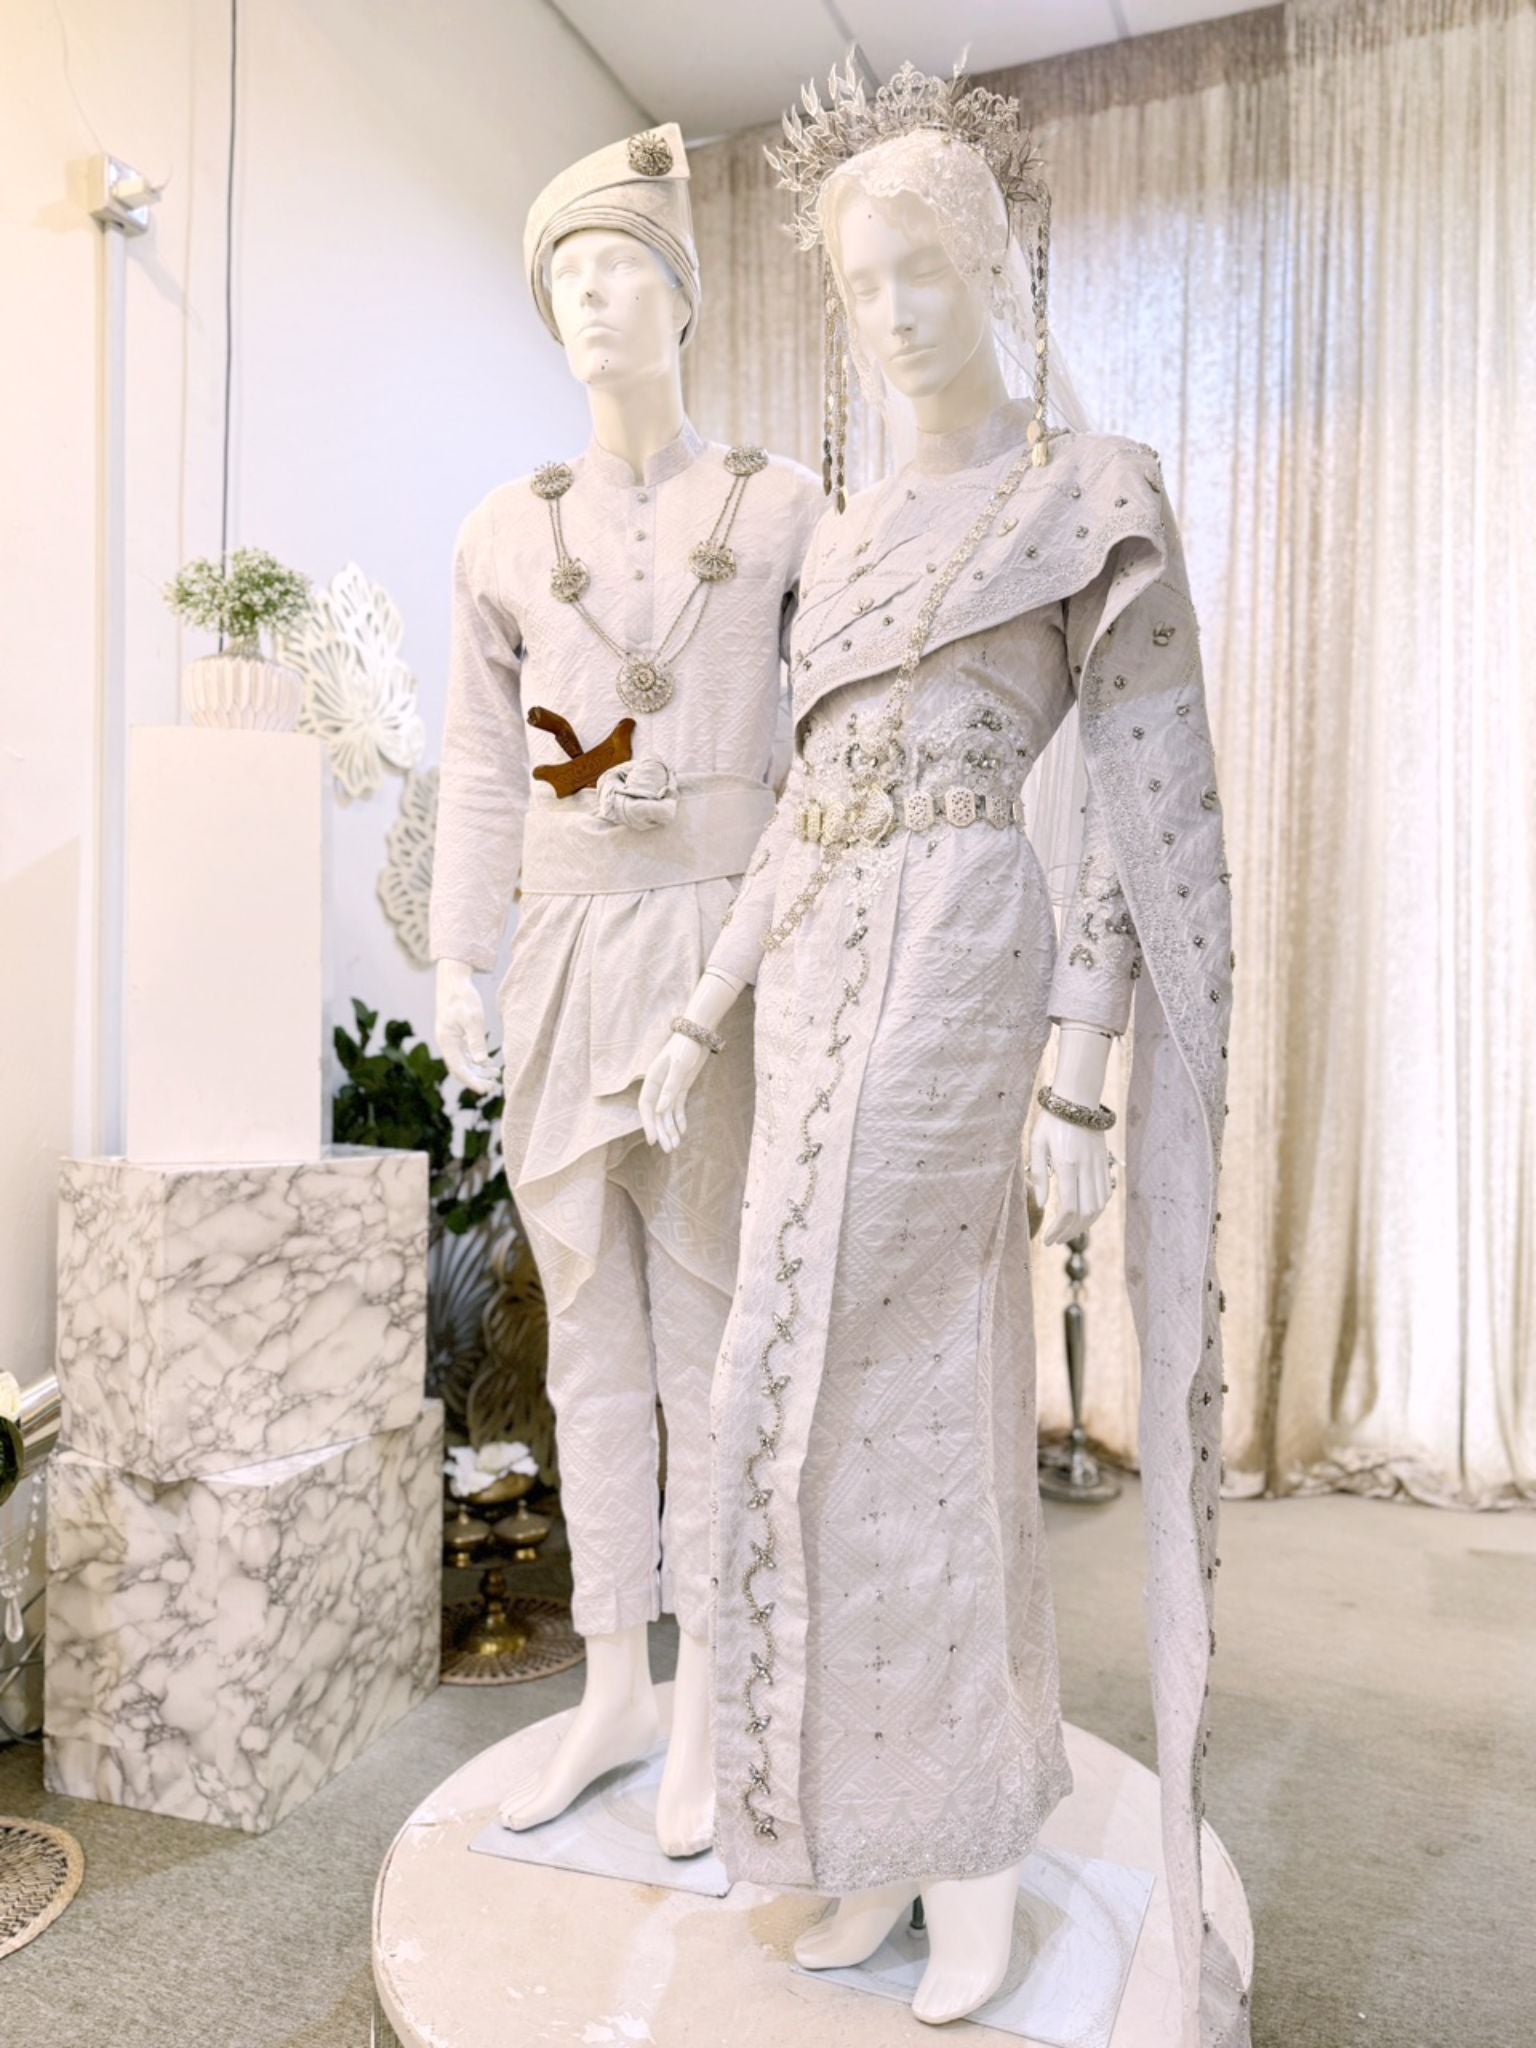 A photograph showcasing Nilam Sari's Baju Pengantin Songket in White with Silver, a blend of Thai-inspired bridal attire. The image captures the bride's ensemble, featuring a graceful Thai Dress design crafted from luxurious Songket 2D material, and the groom's attire, adorned with the intricate Kot Raihan 2pcs